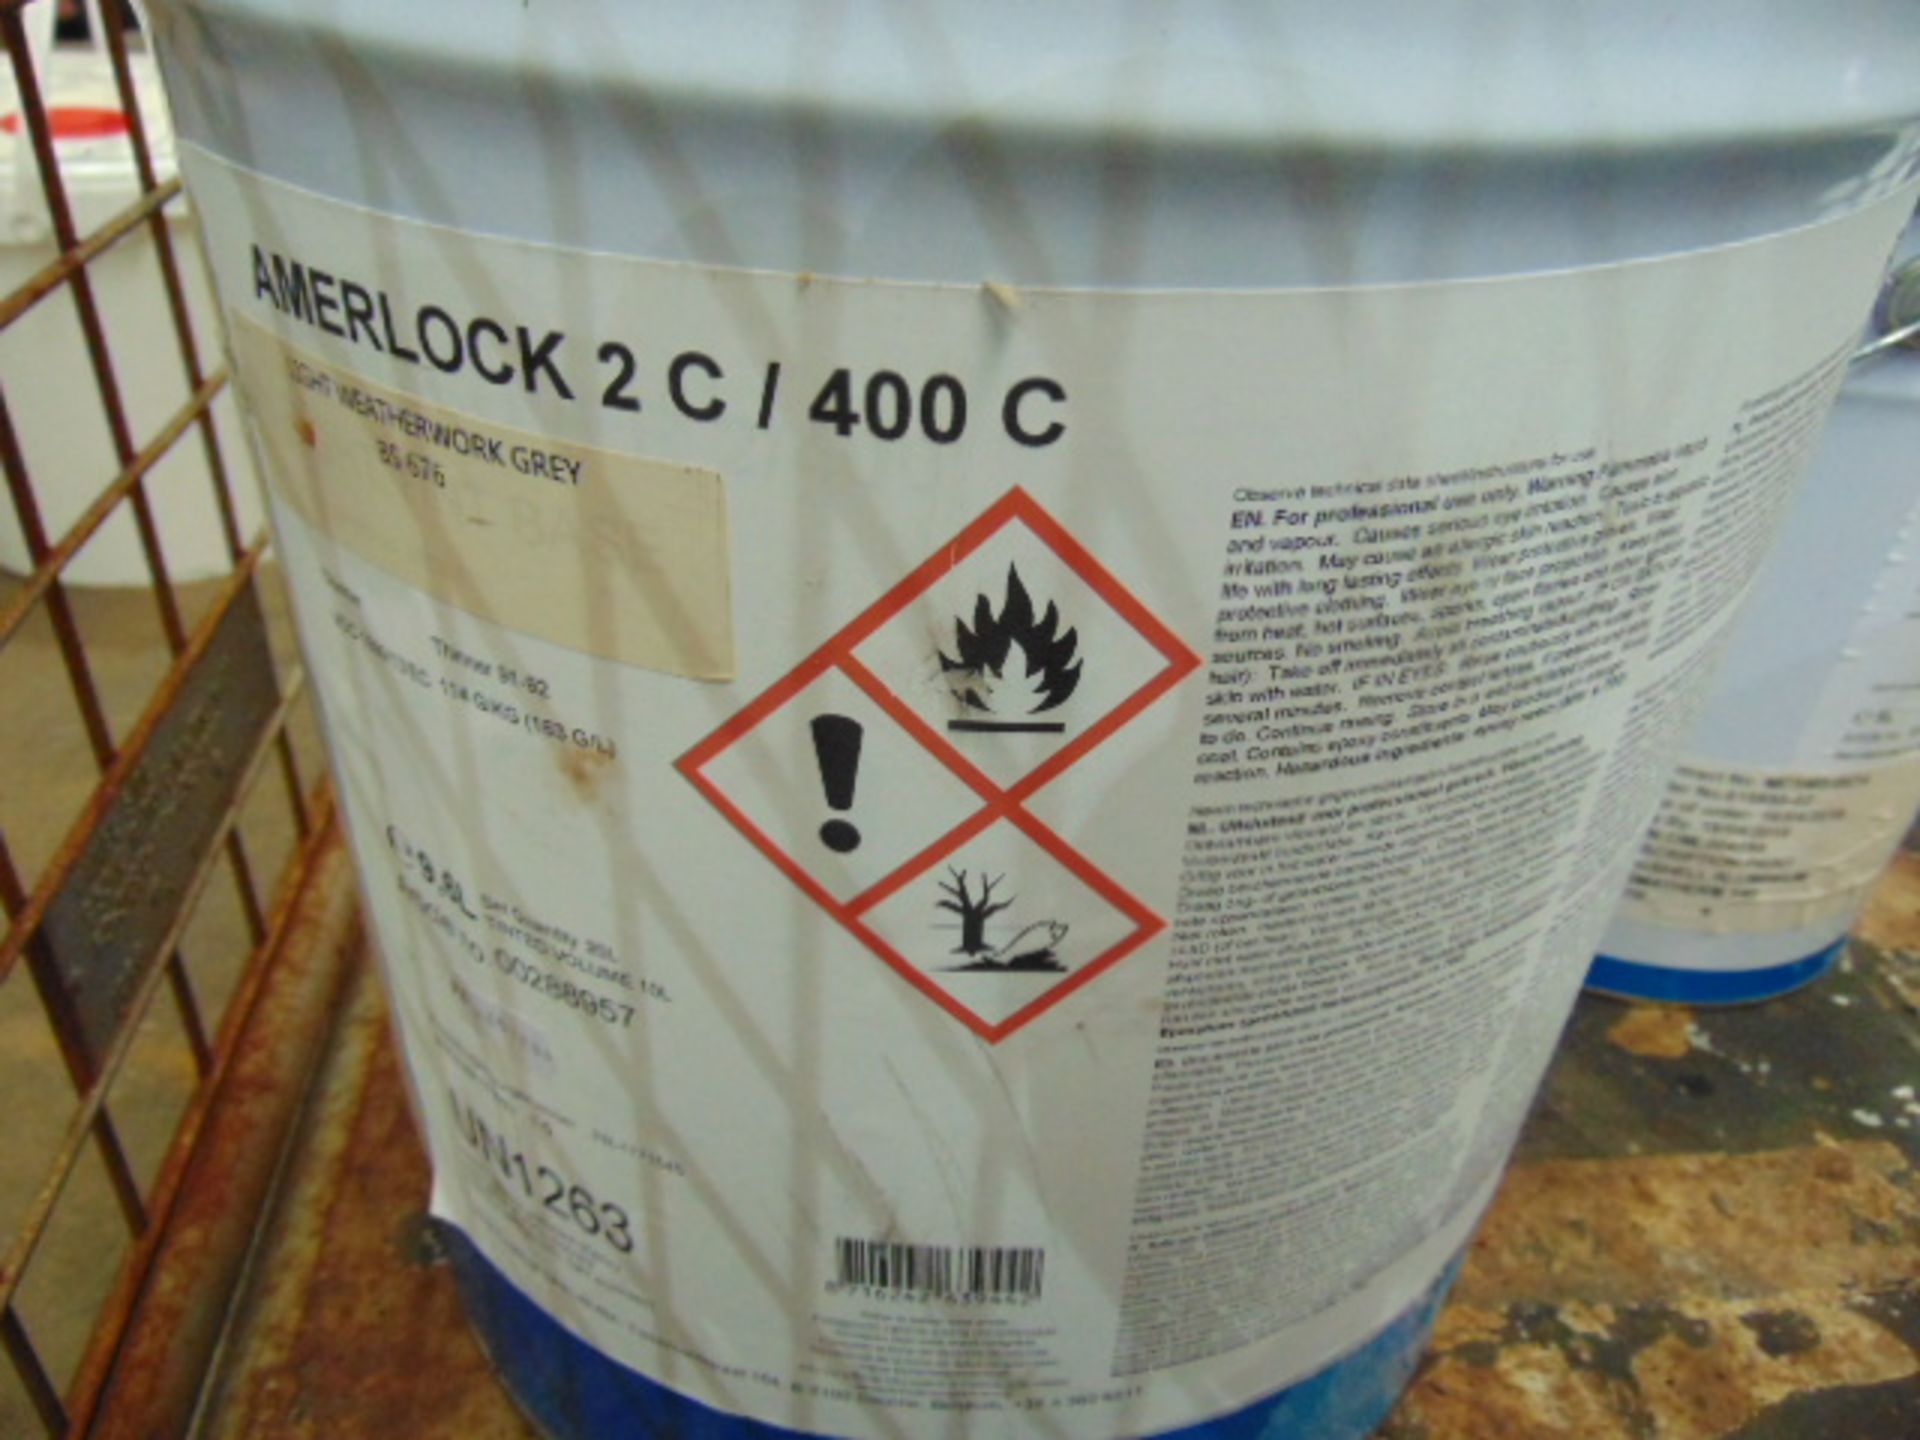 1 x Large 12 Ltr Amerlock 2C/400C Grey Resin Paint Direct from RN reserve stores - Image 2 of 3